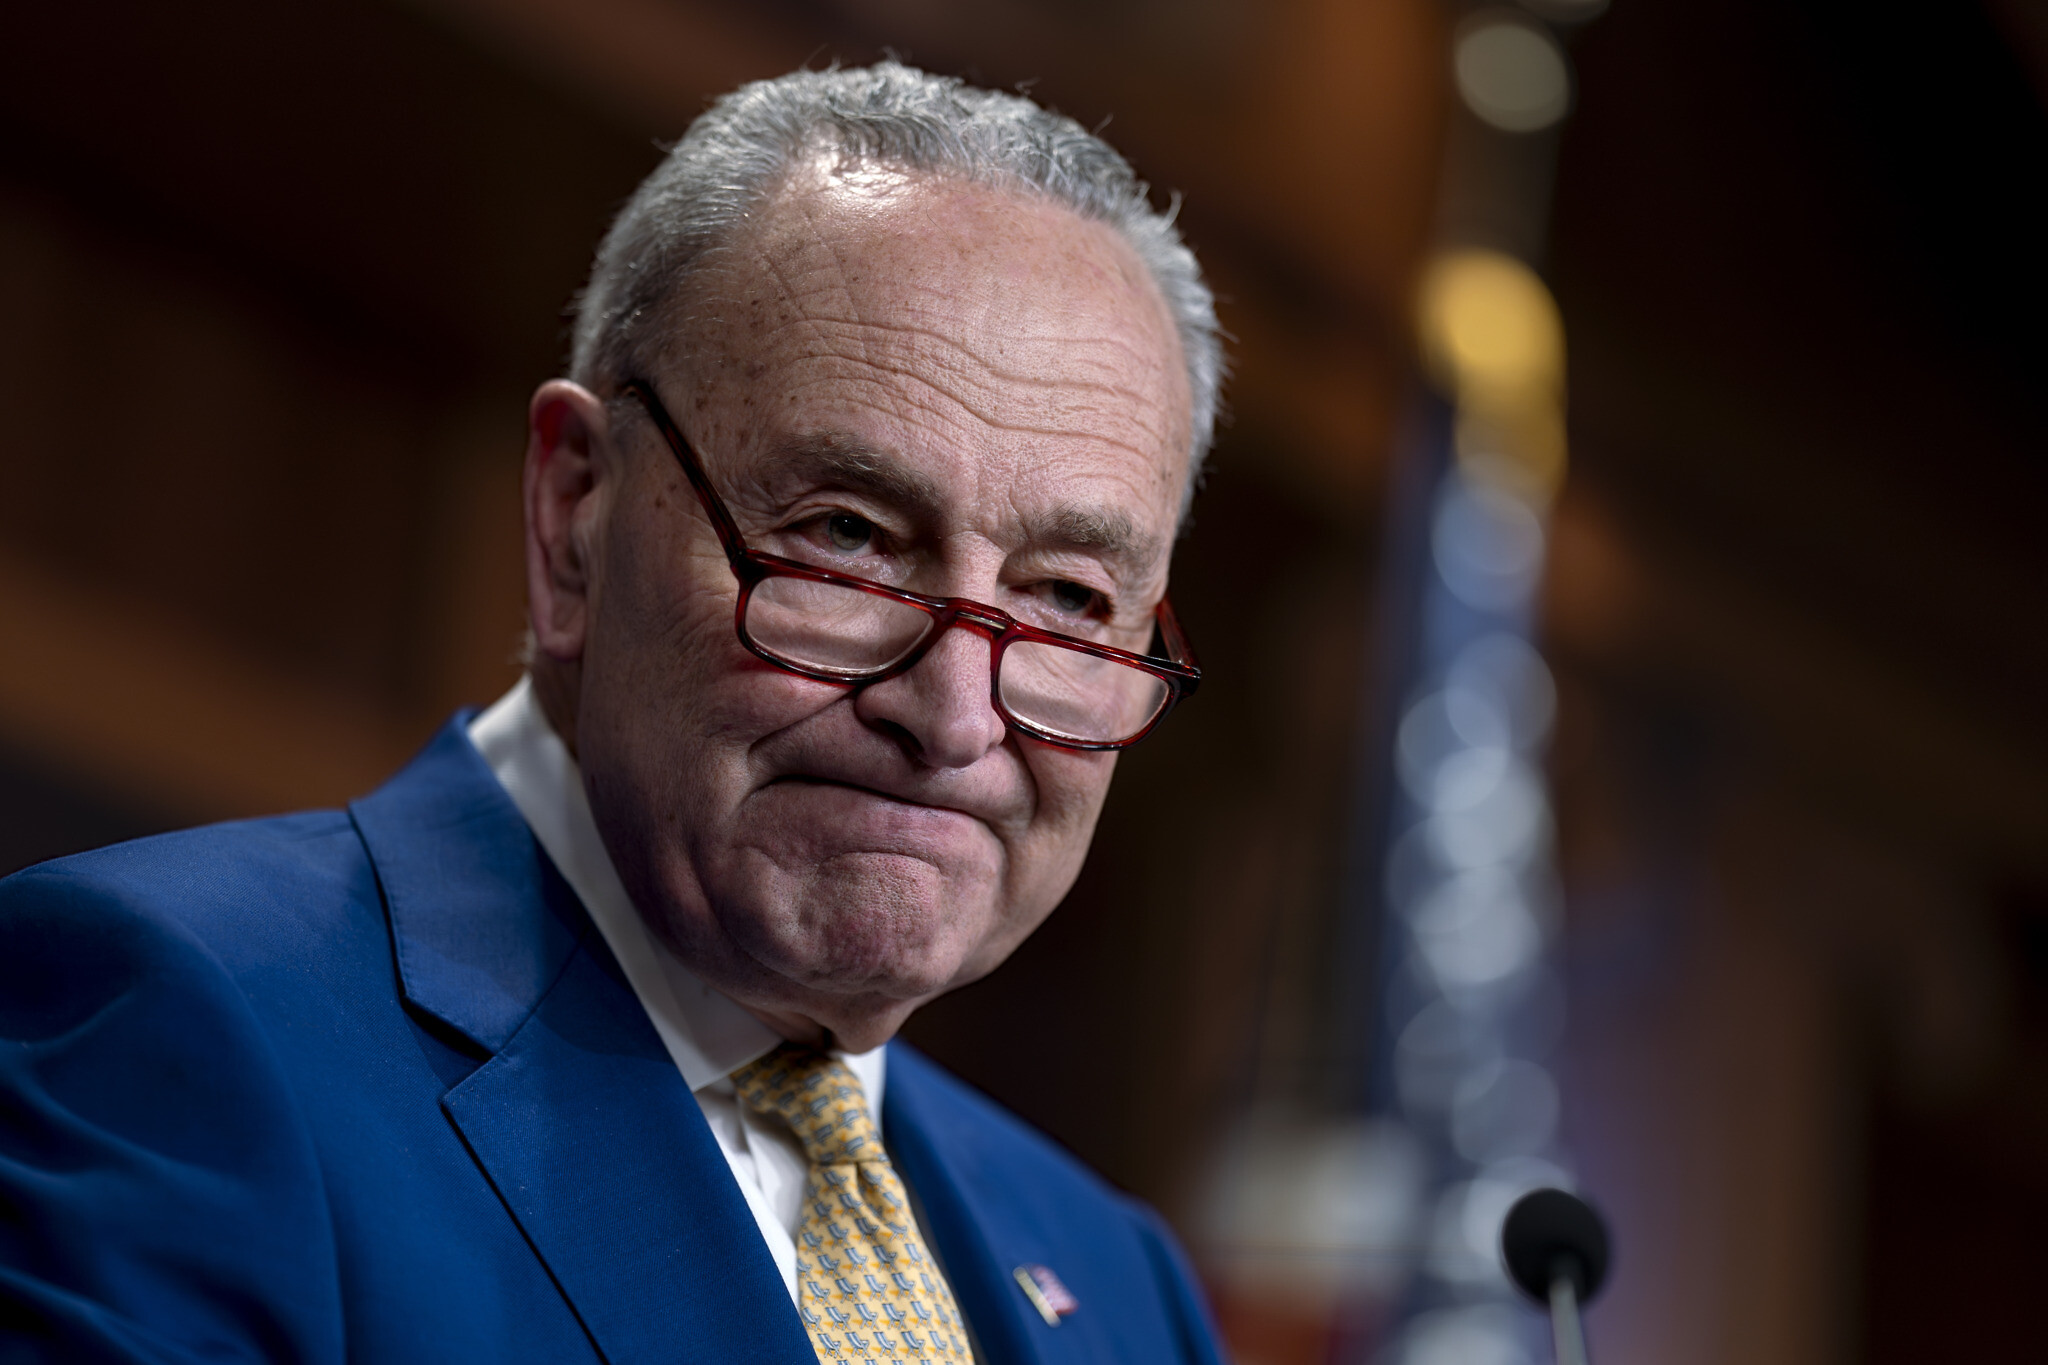 March 19: Schumer mulled calling on Netanyahu to quit amid fears Israel  will become a pariah state